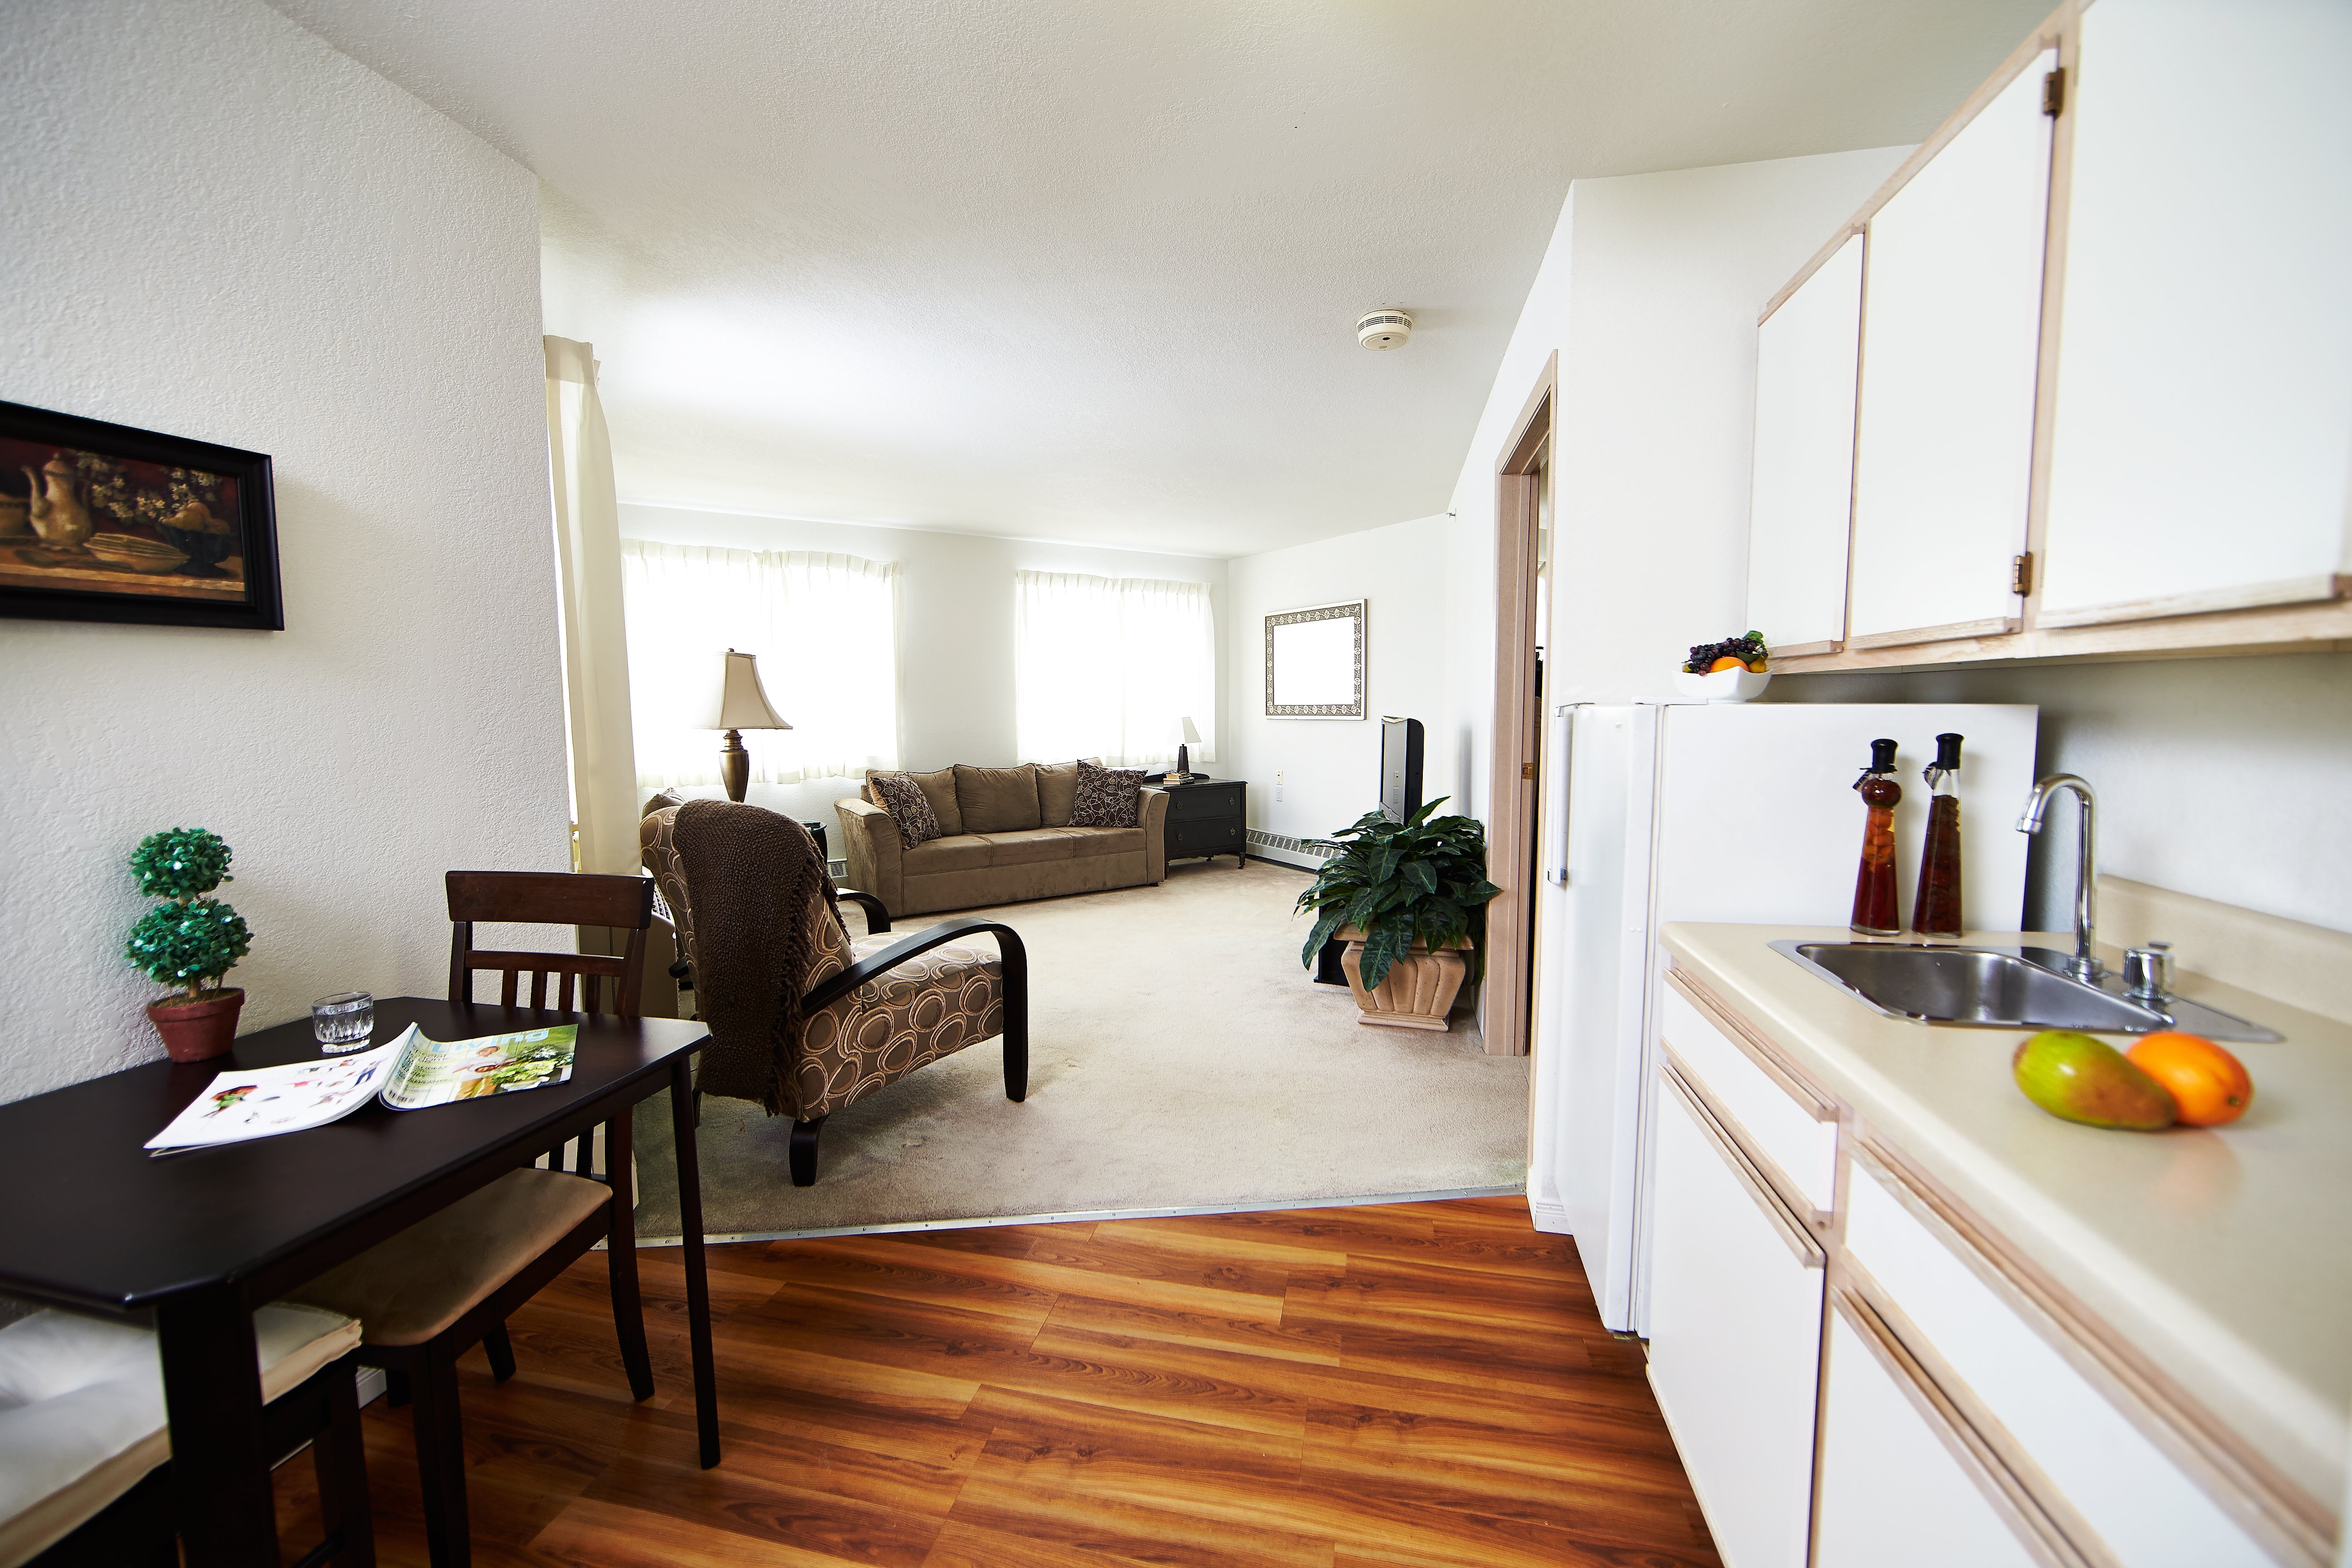 Image of a suite at Kensington Court Retirement Residence in Windsor